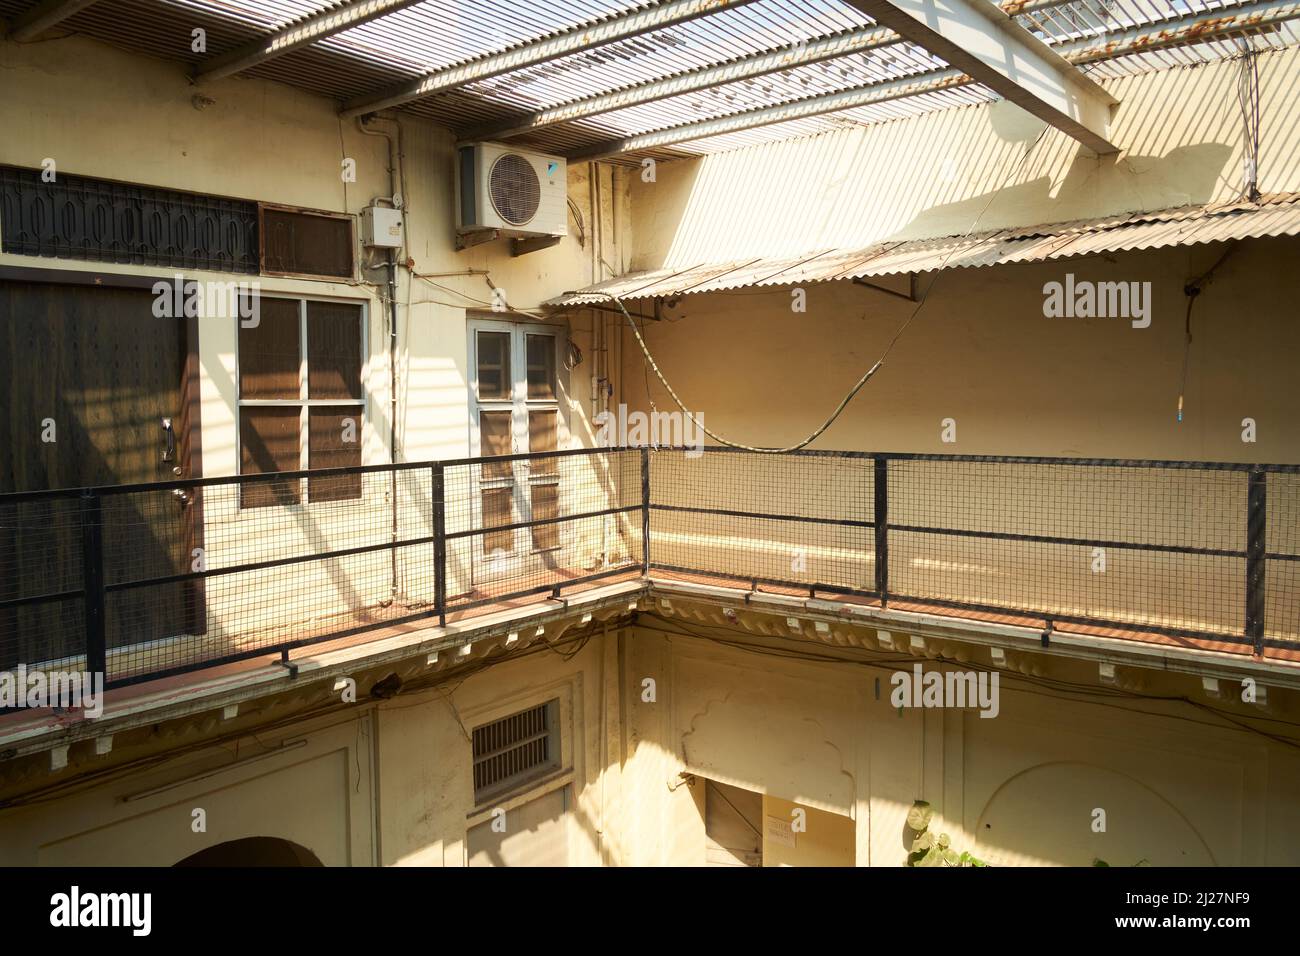 A typical house with courtyard in Agra, Uttar Pradesh, India Stock Photo